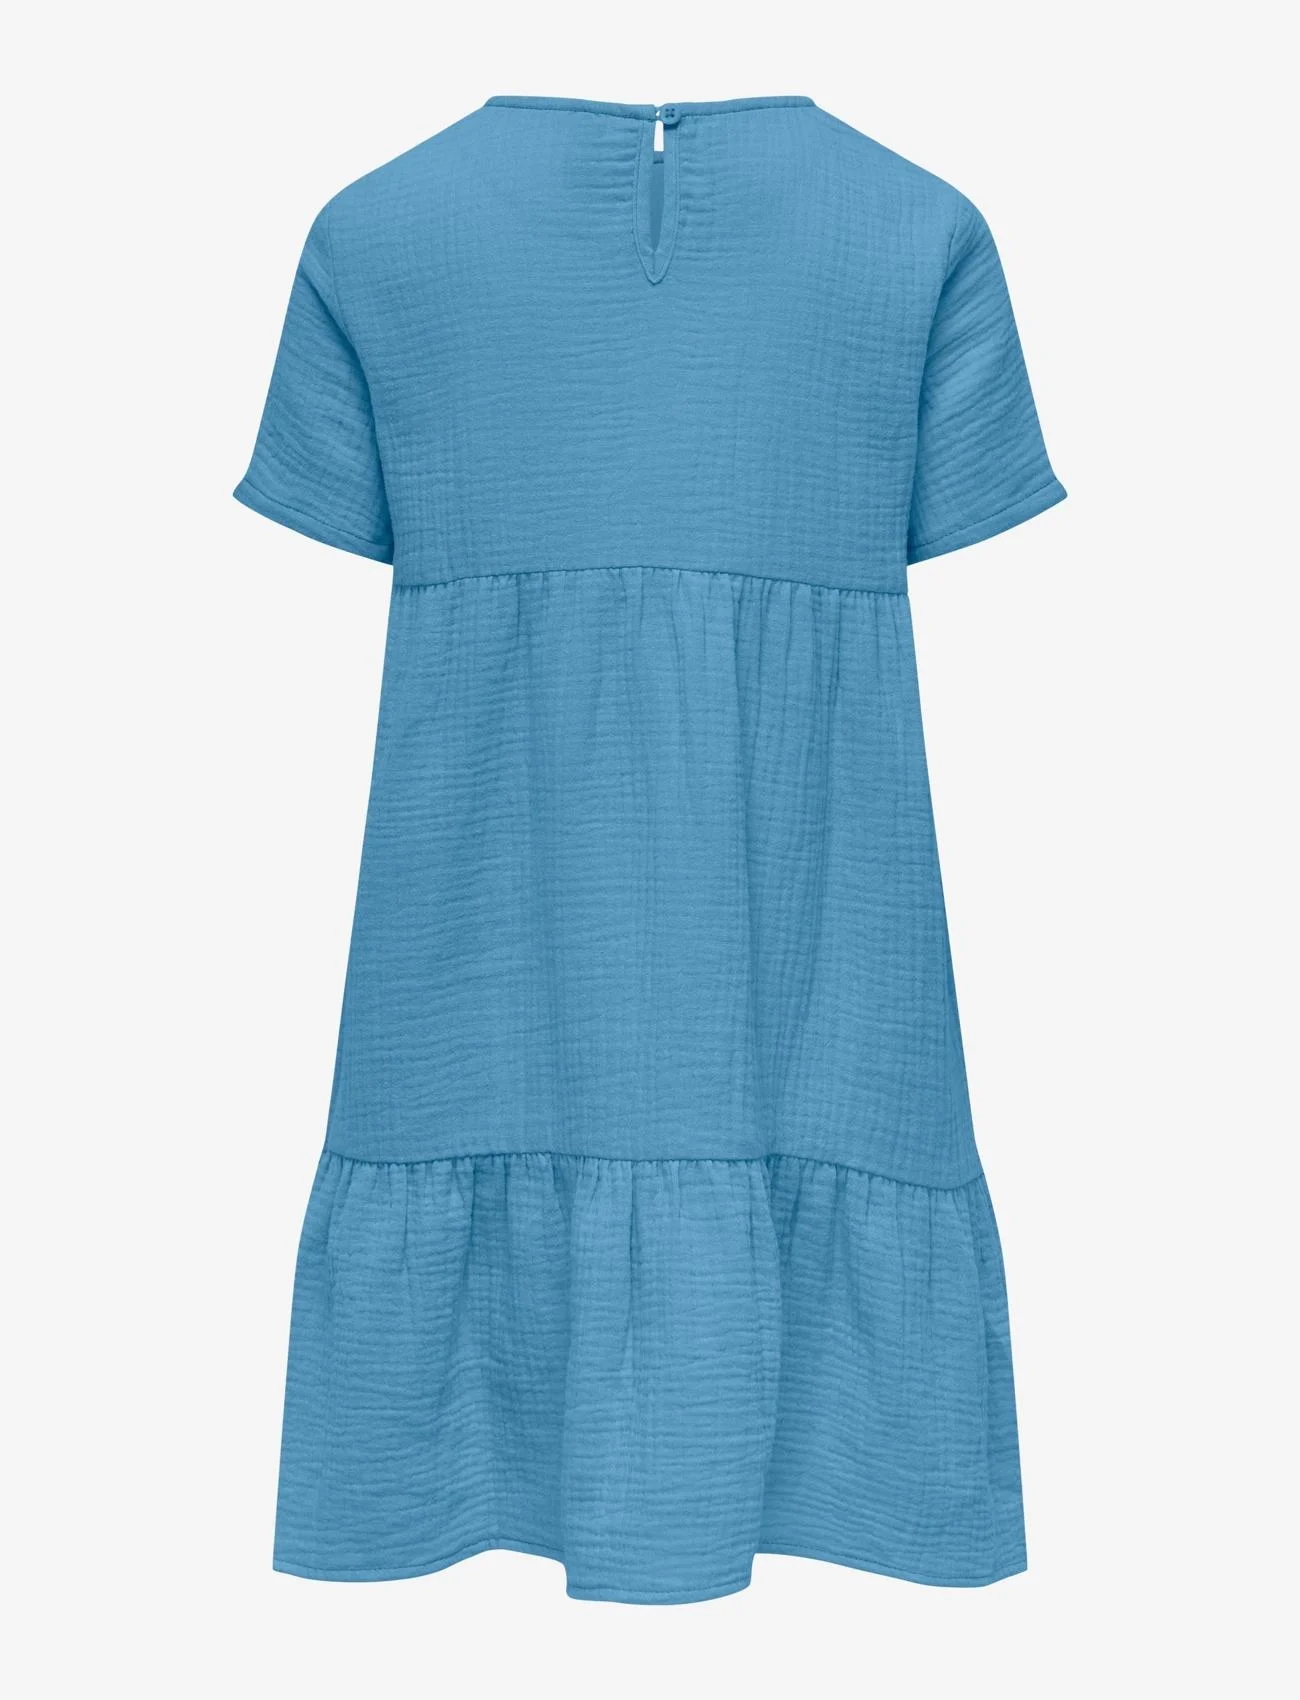 Kids Only - KOGTHYRA S/S LAYERED DRESS WVN - short-sleeved casual dresses - blissful blue - 1